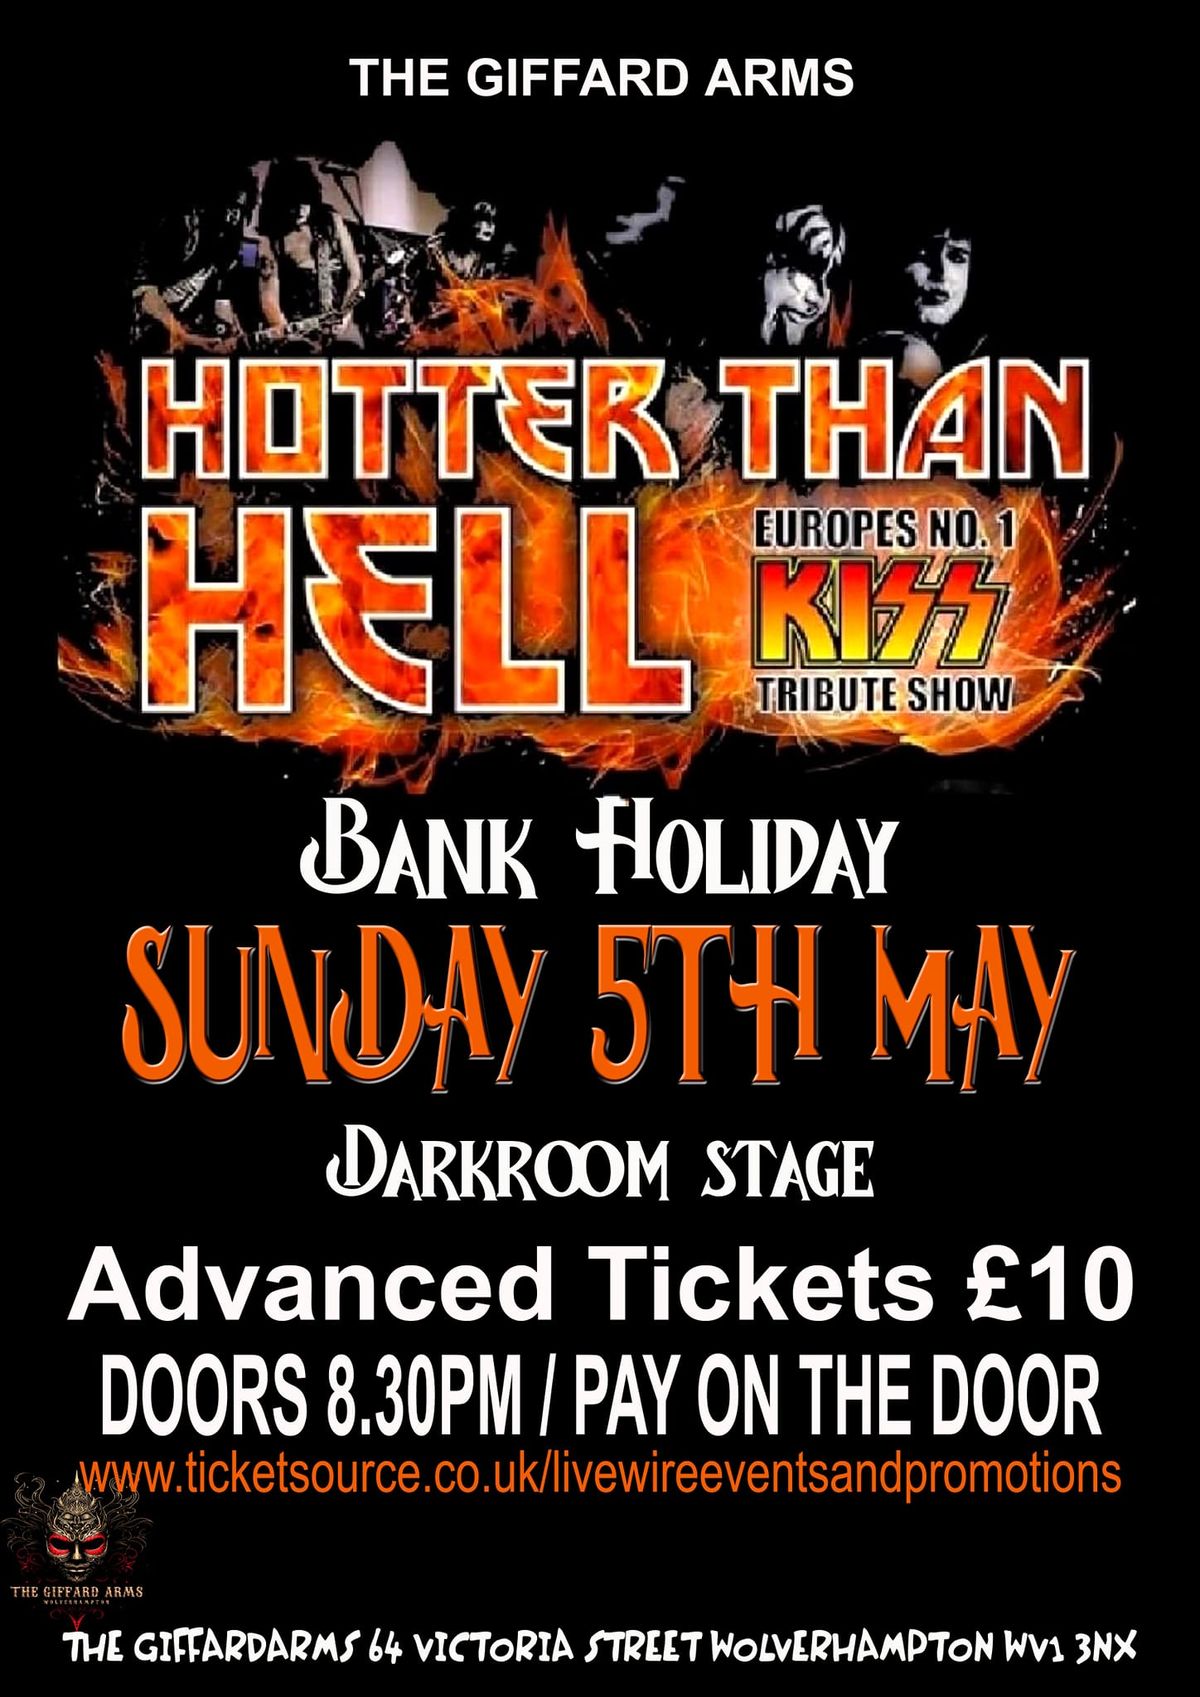 HOTTER THAN HELL Europe's No1 Kiss Tribute Band